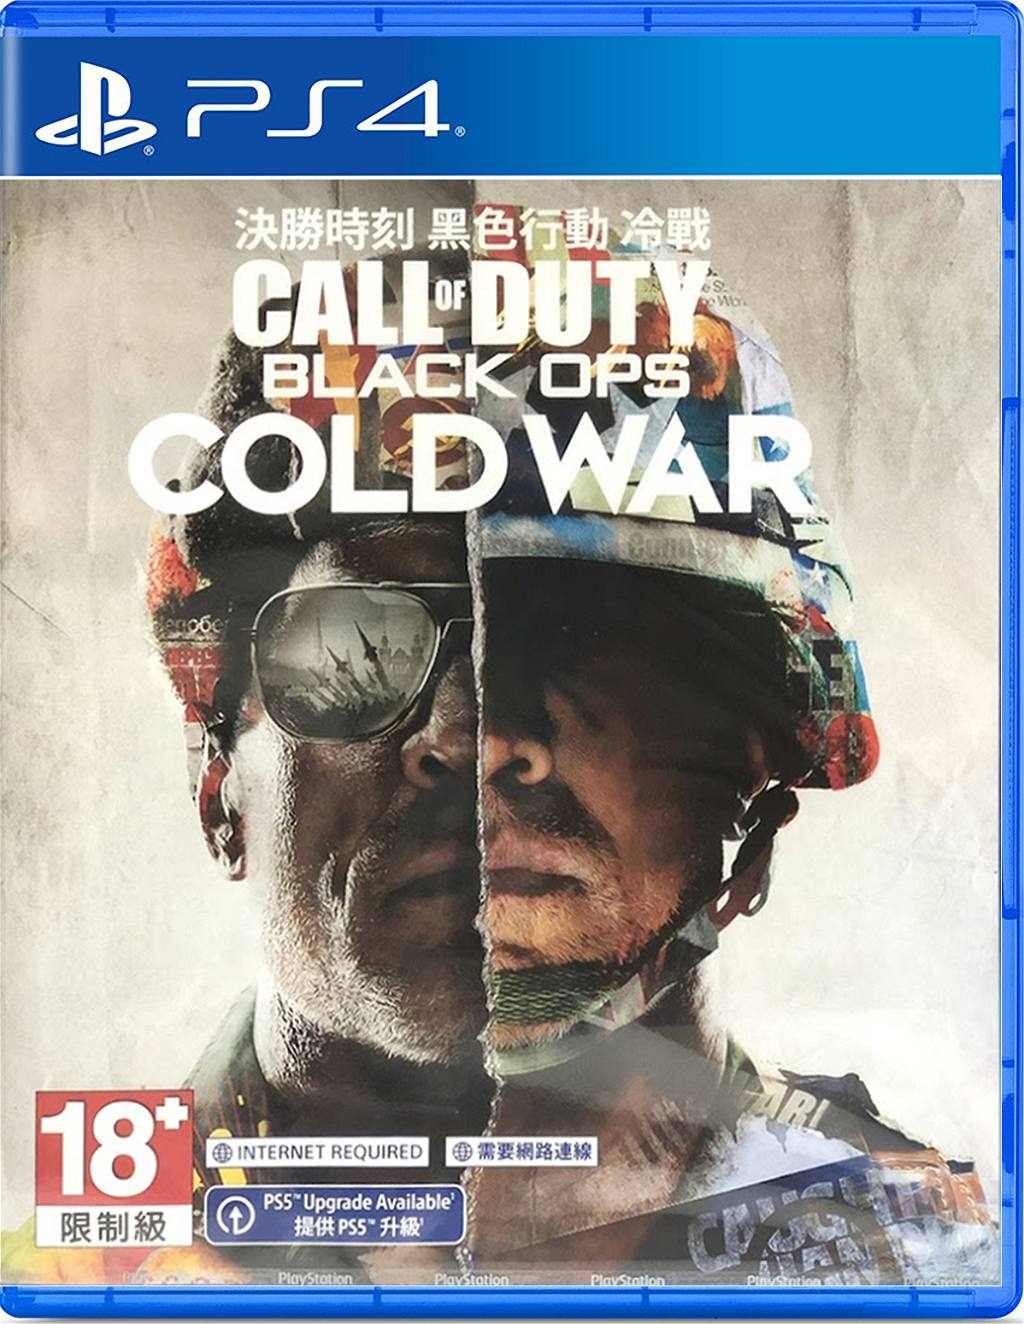 Blank arsenal Sport Call of Duty Black Ops Cold War (English) for PlayStation 4